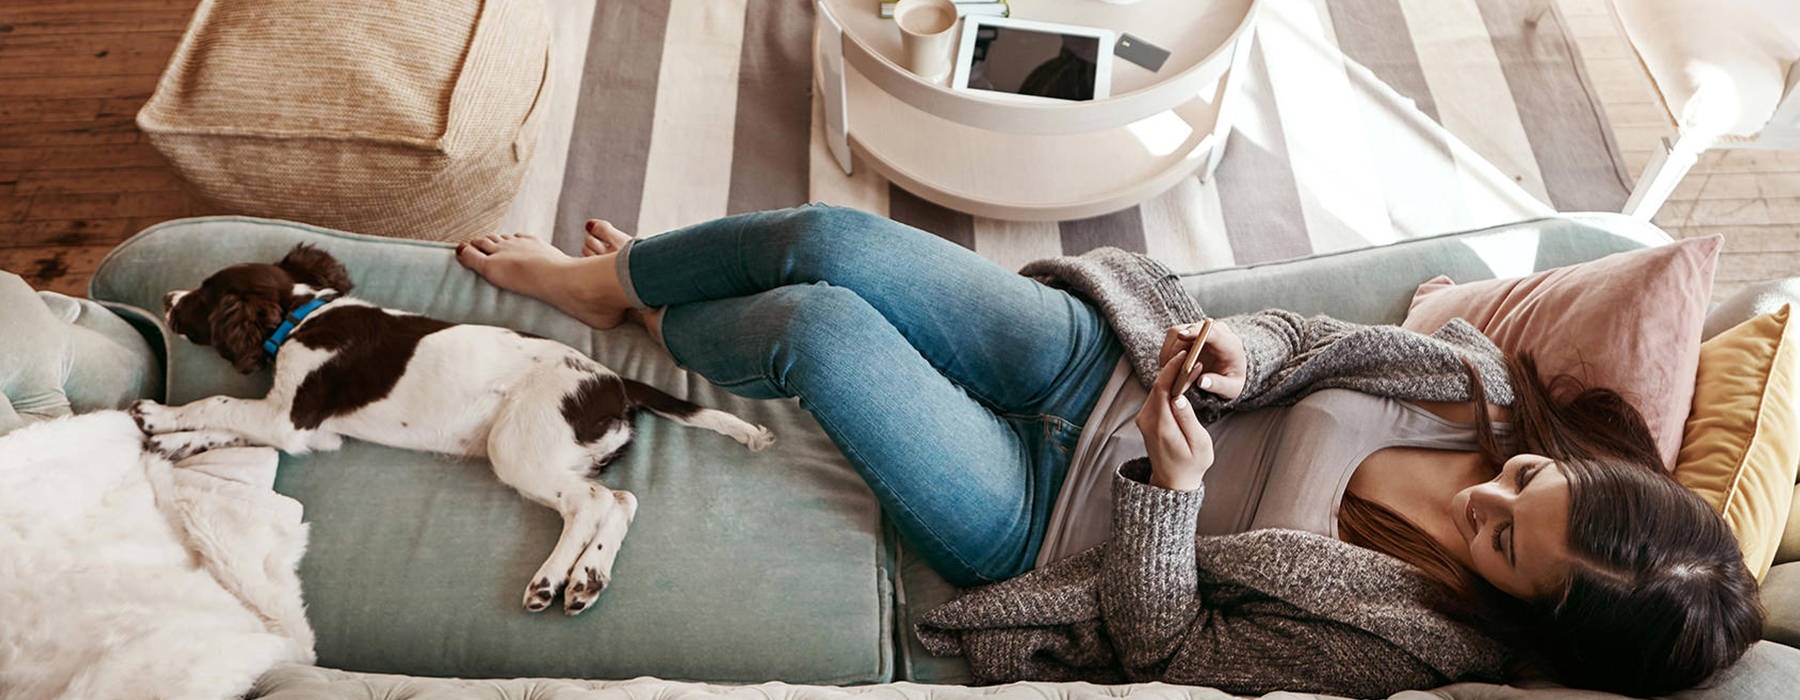 woman relaxing with dog on couch while playing on her phone